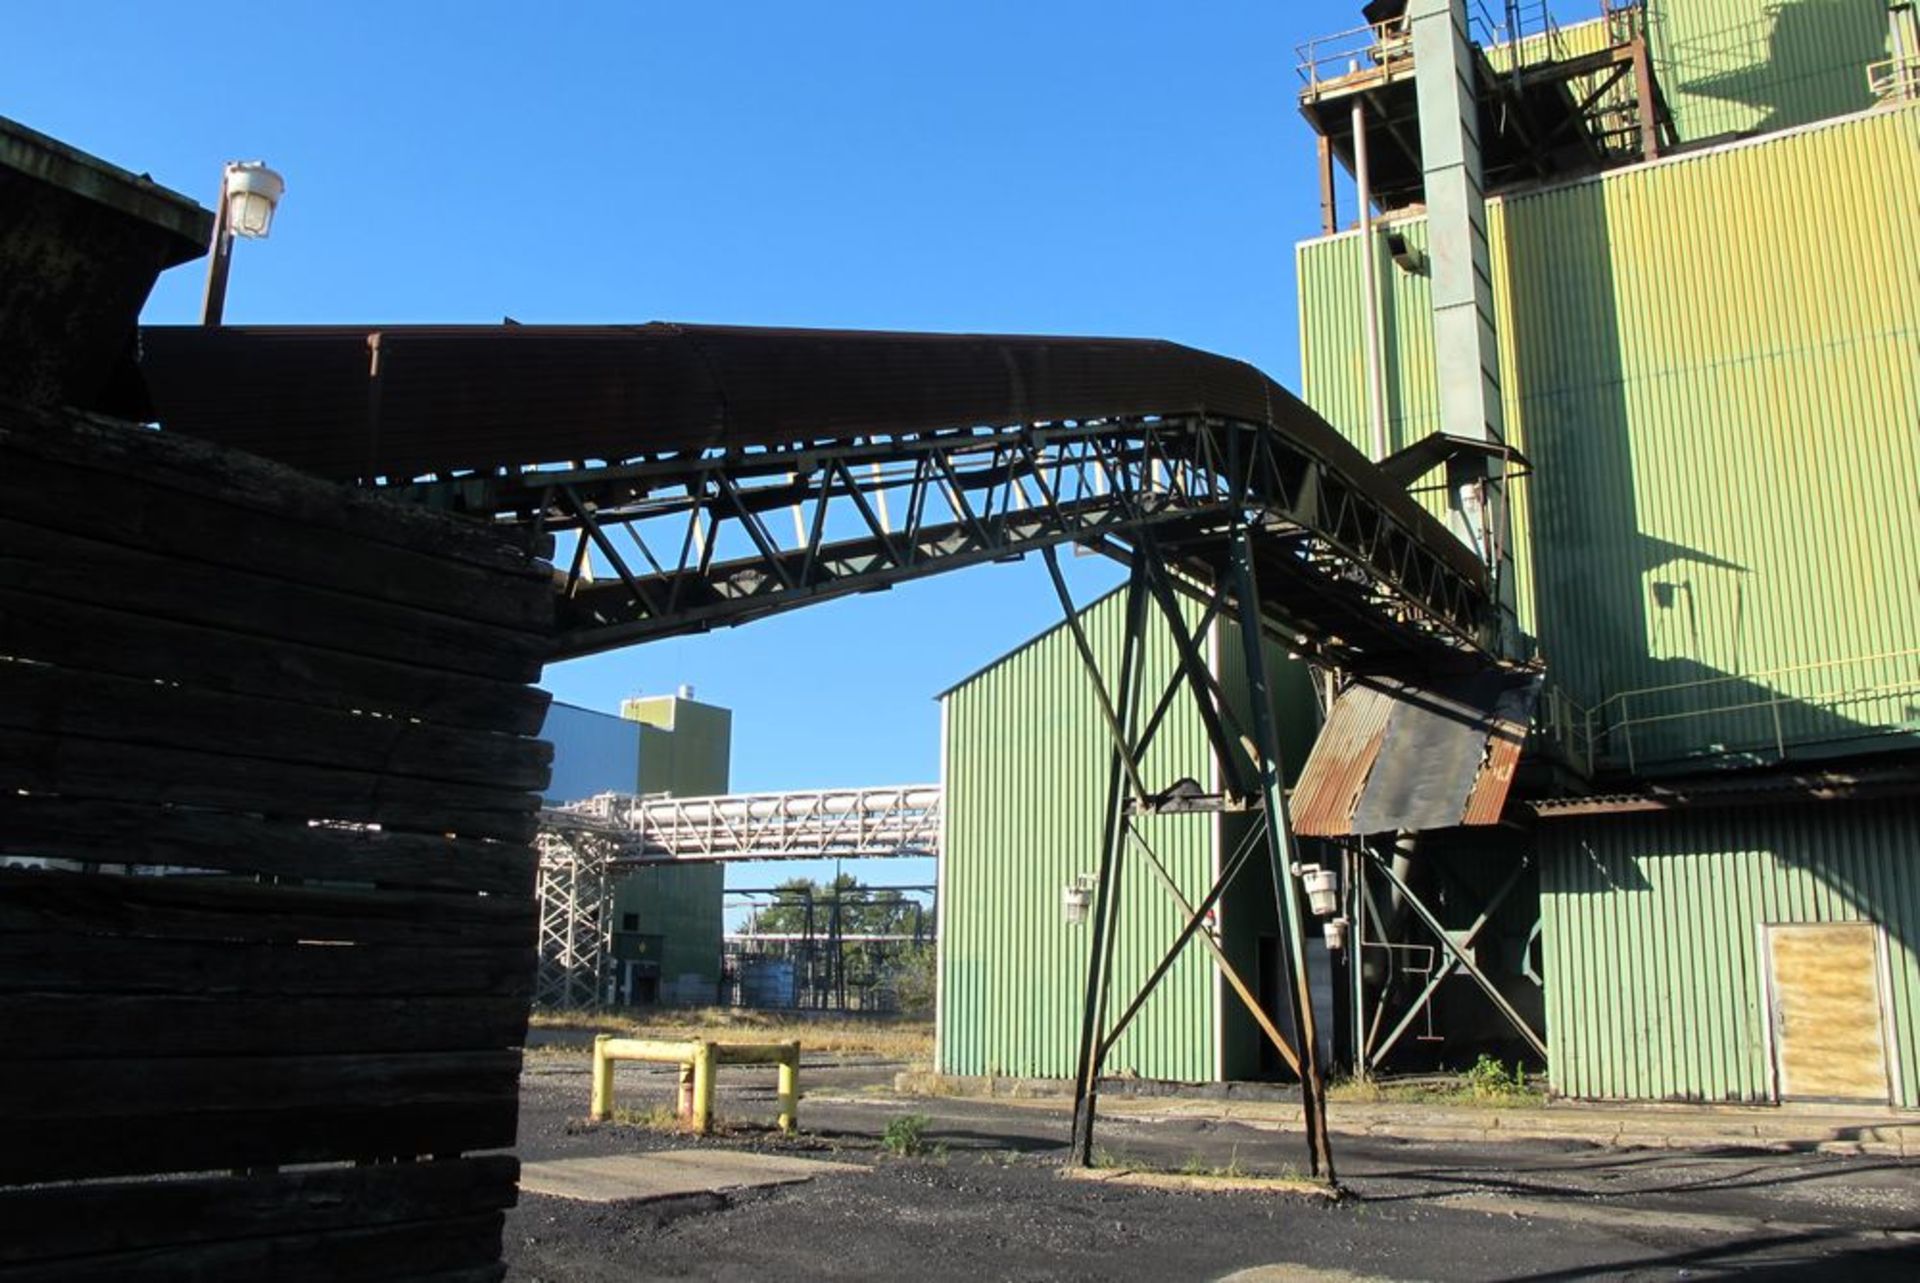 LOT OF 3 COAL TRANSFER INCLINE CONVEYORS, 2 HOPPERSAND COAL CRUSHER SUPPORT COLUMNS, COAL PITTO - Image 5 of 8